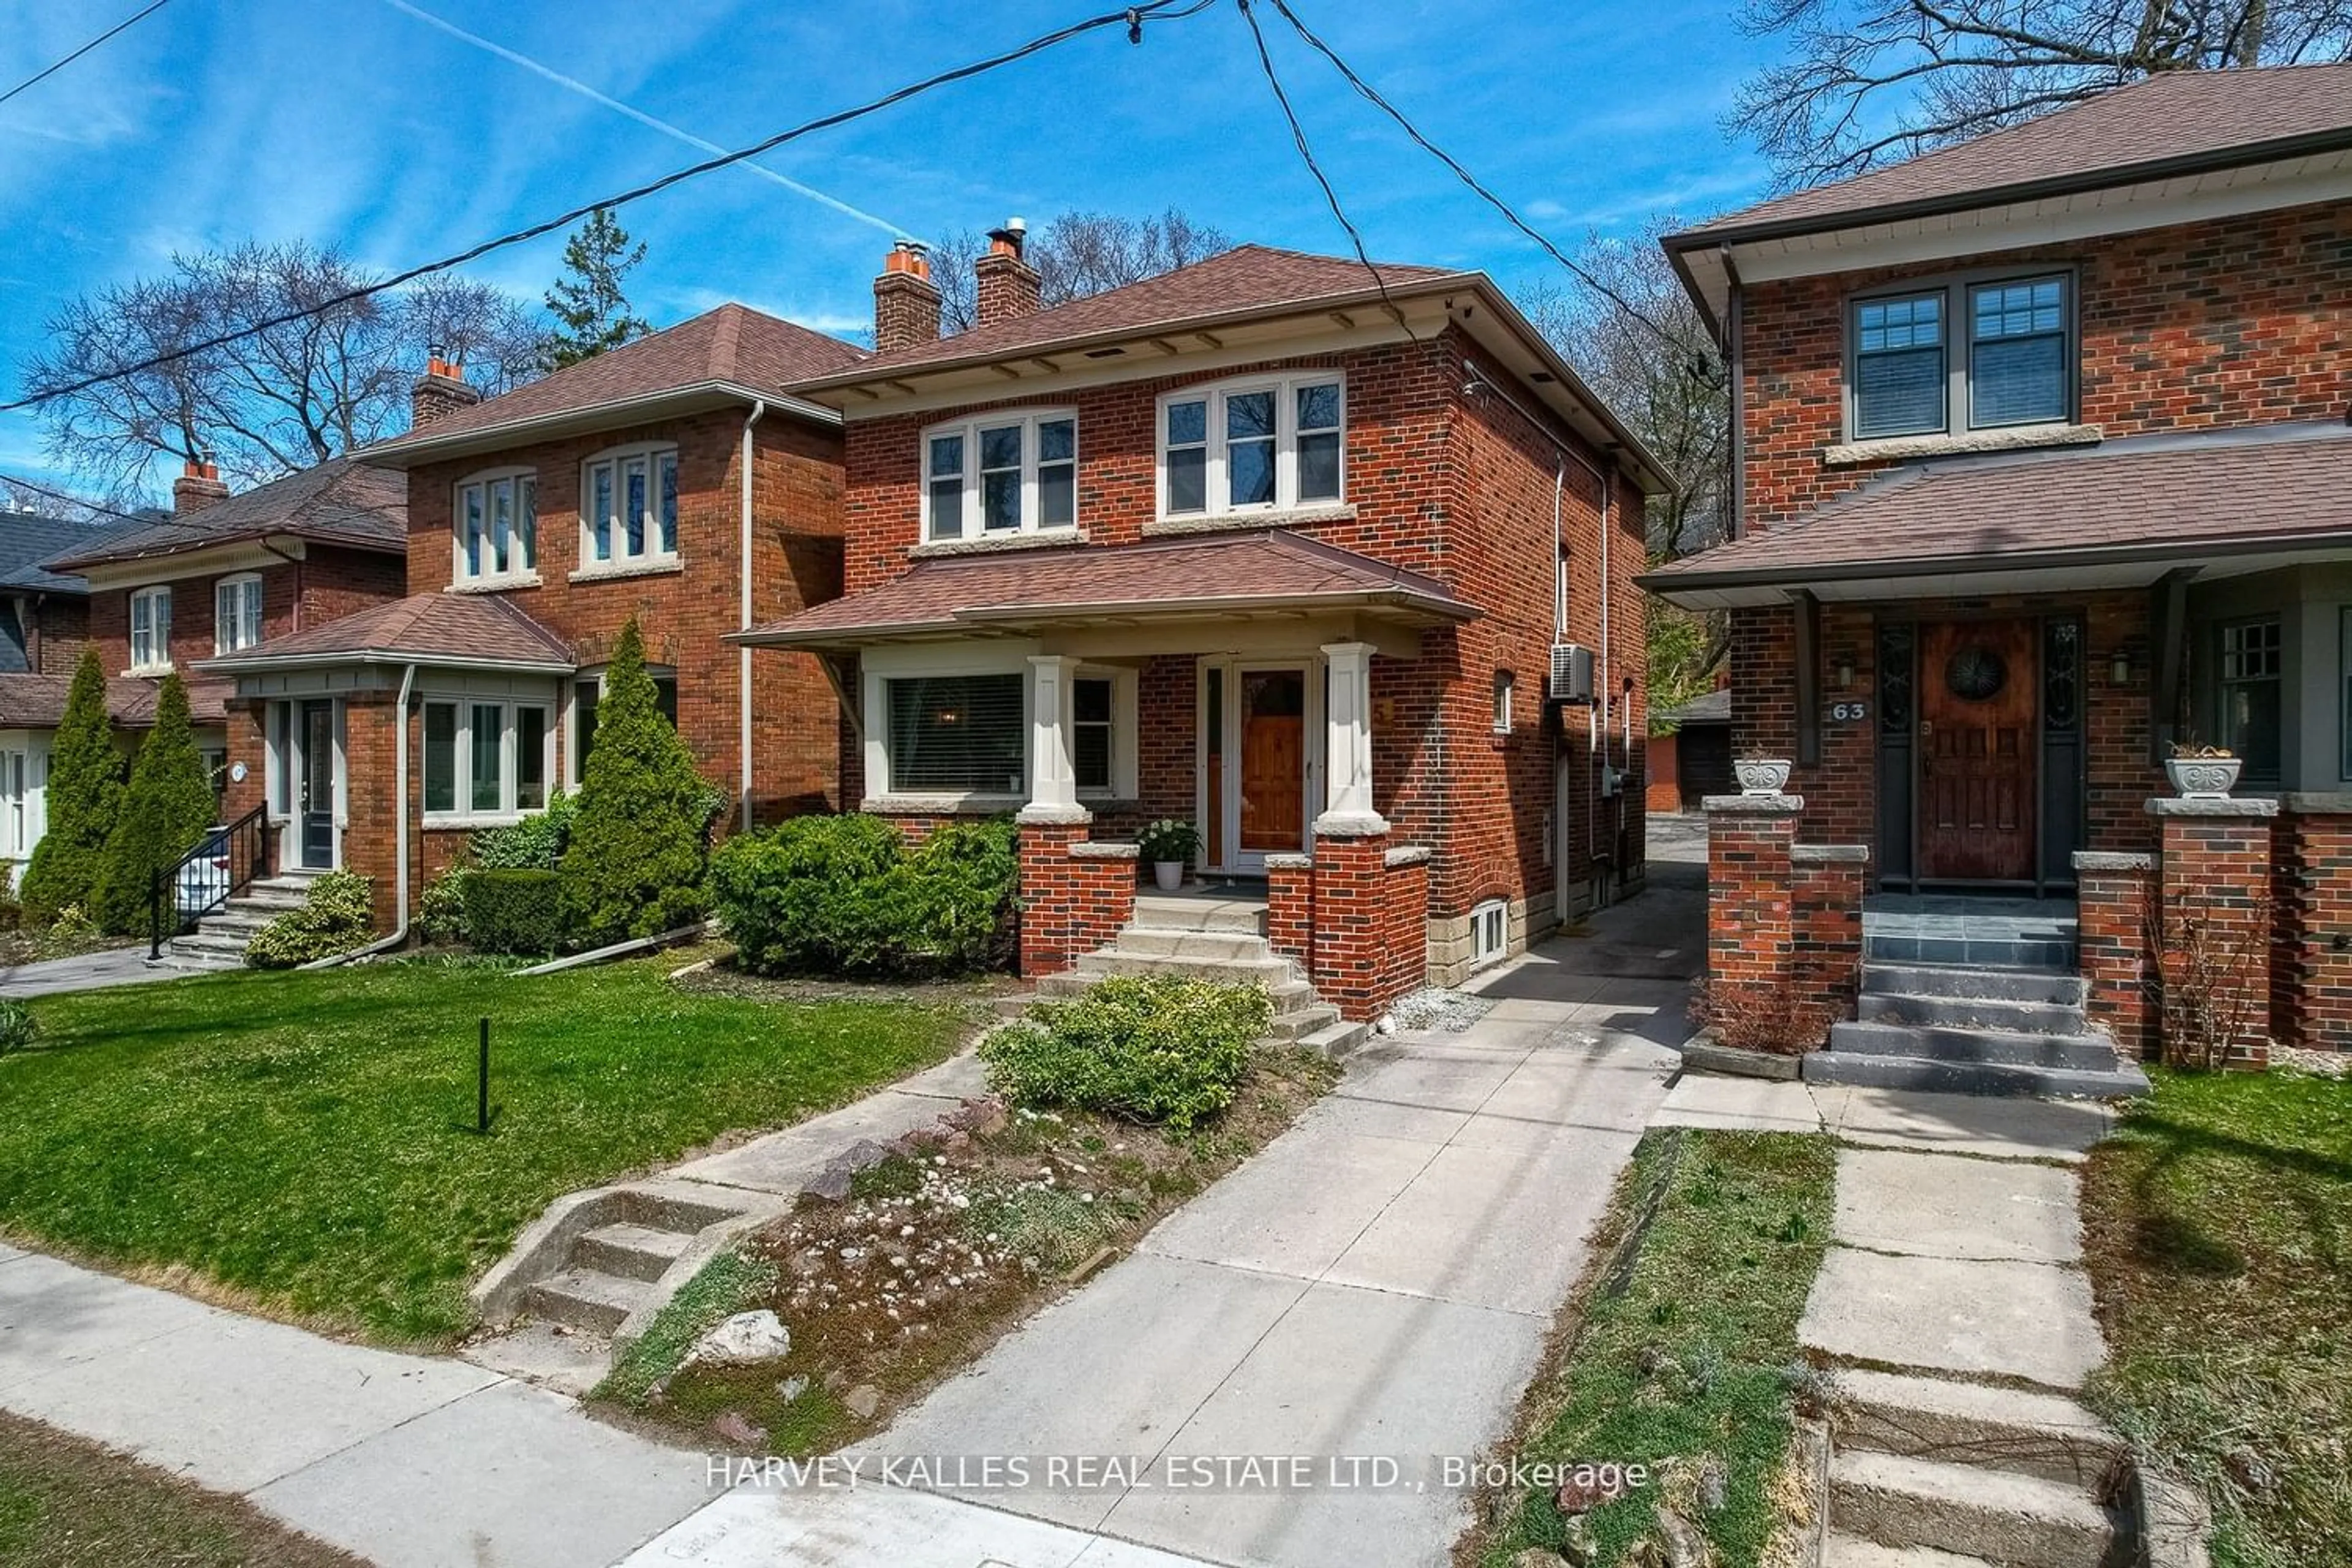 Home with brick exterior material for 65 Old Mill Dr, Toronto Ontario M6S 4J8